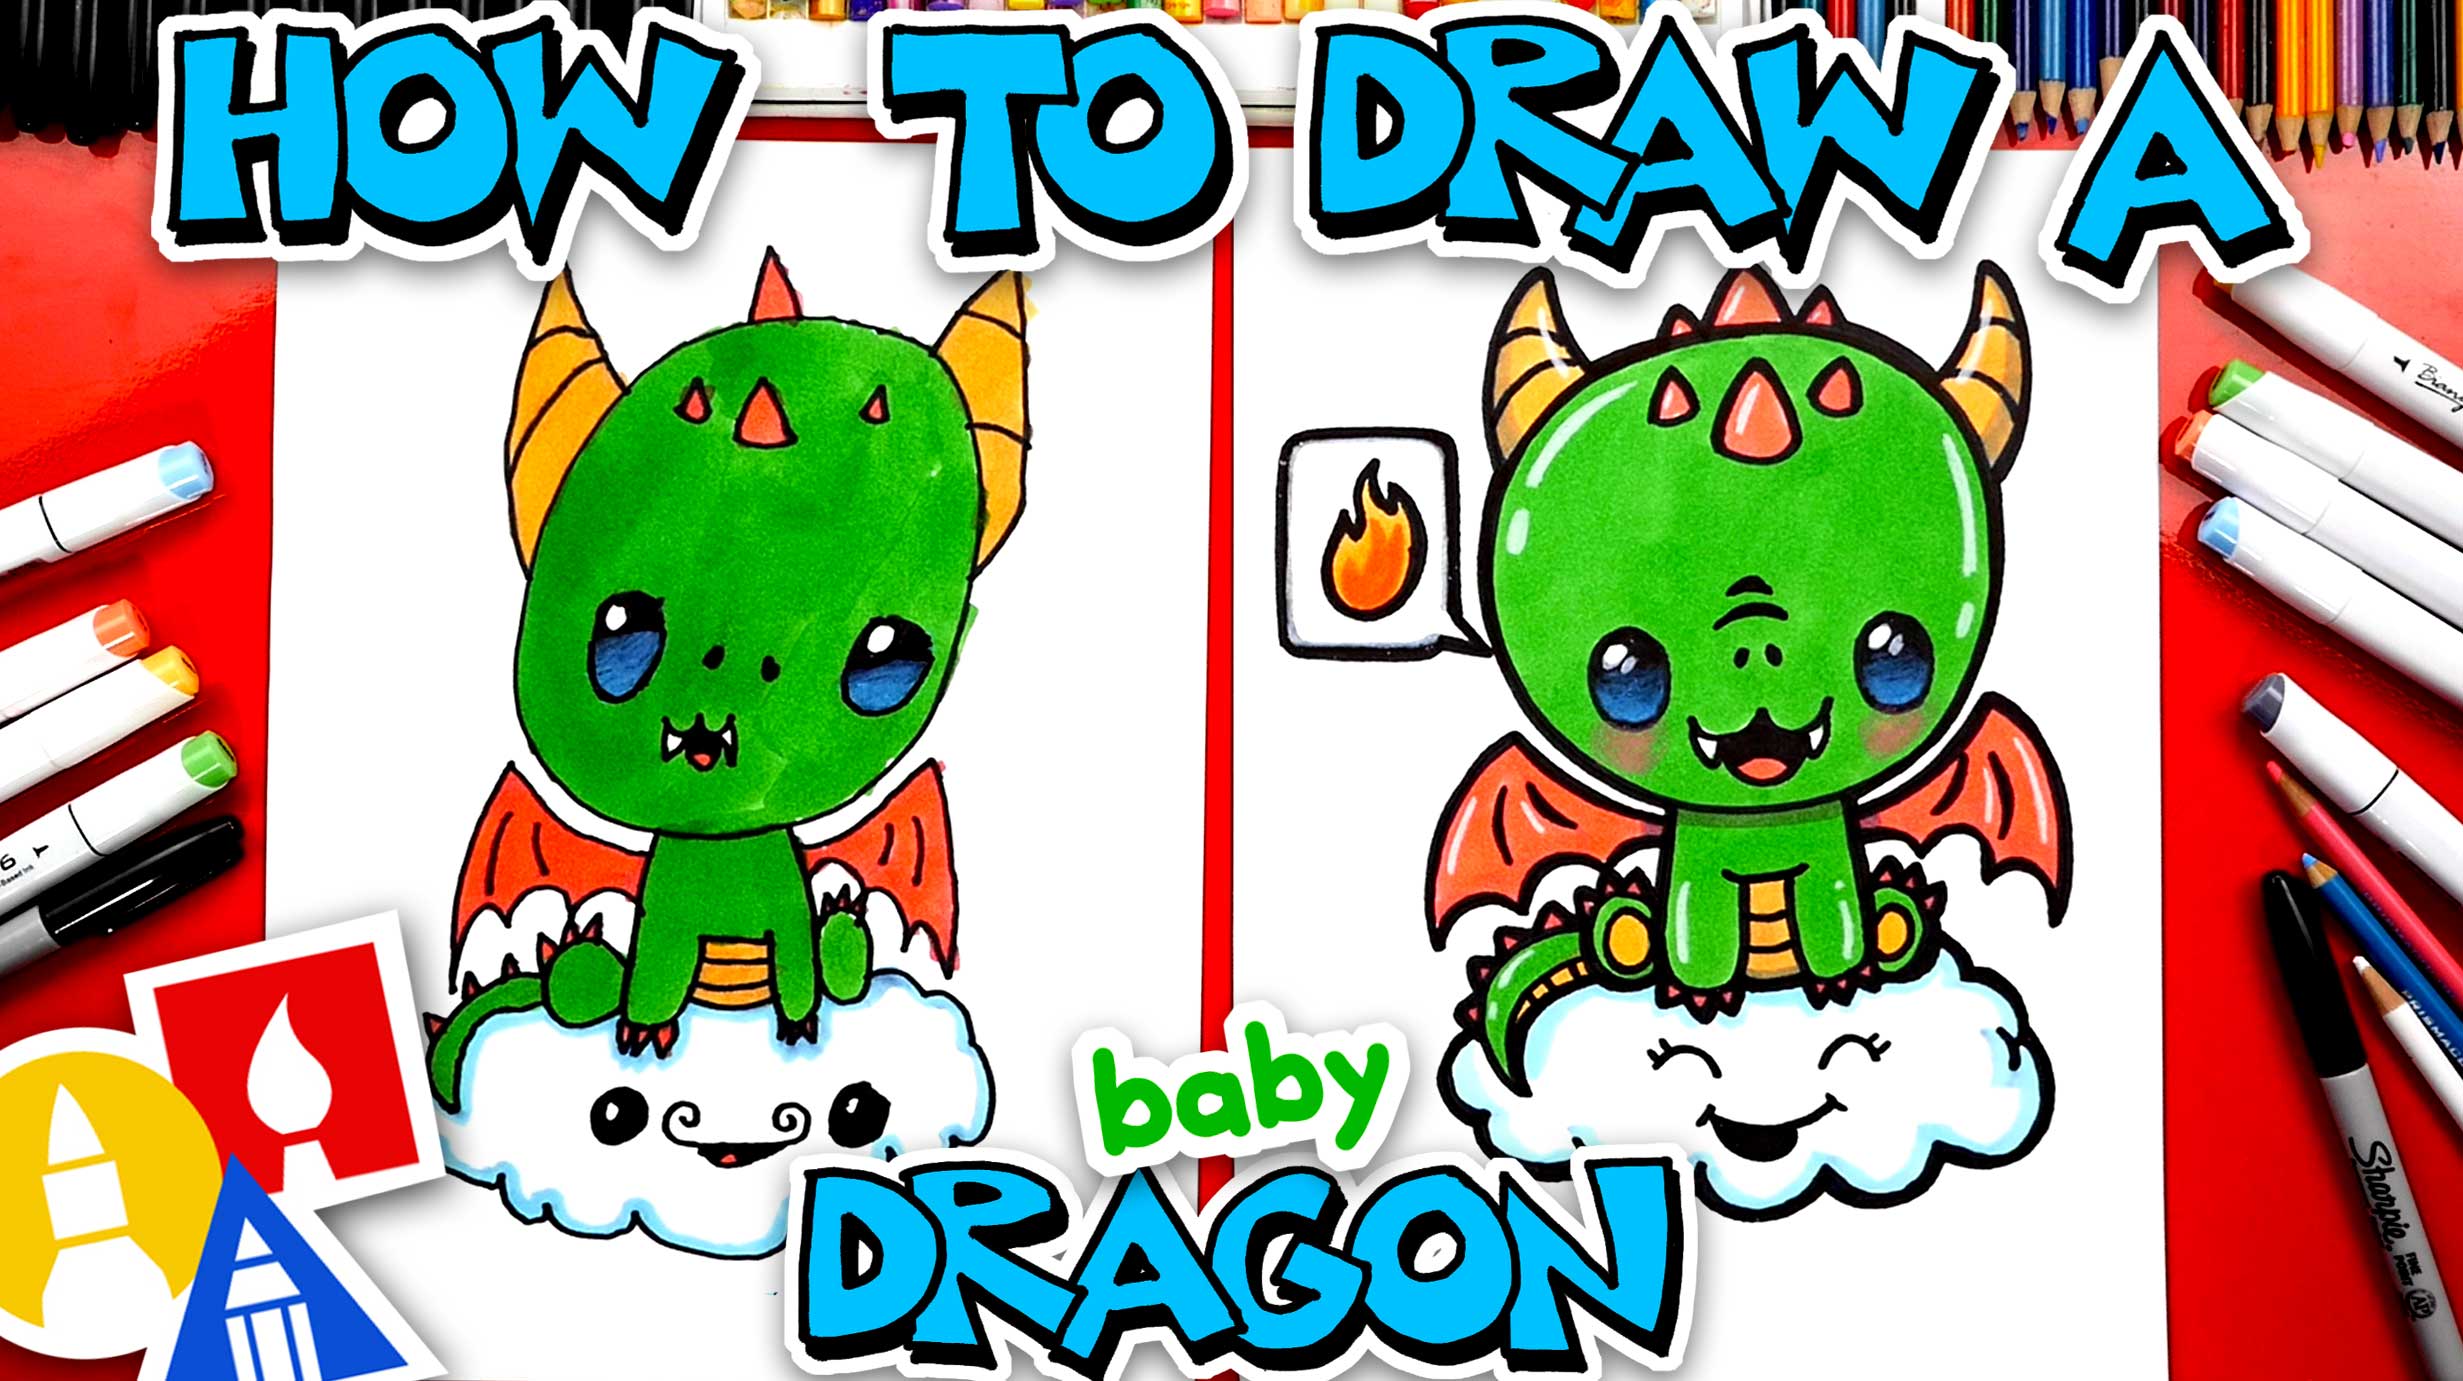 How To Draw A Baby Dragon - Art For Kids Hub